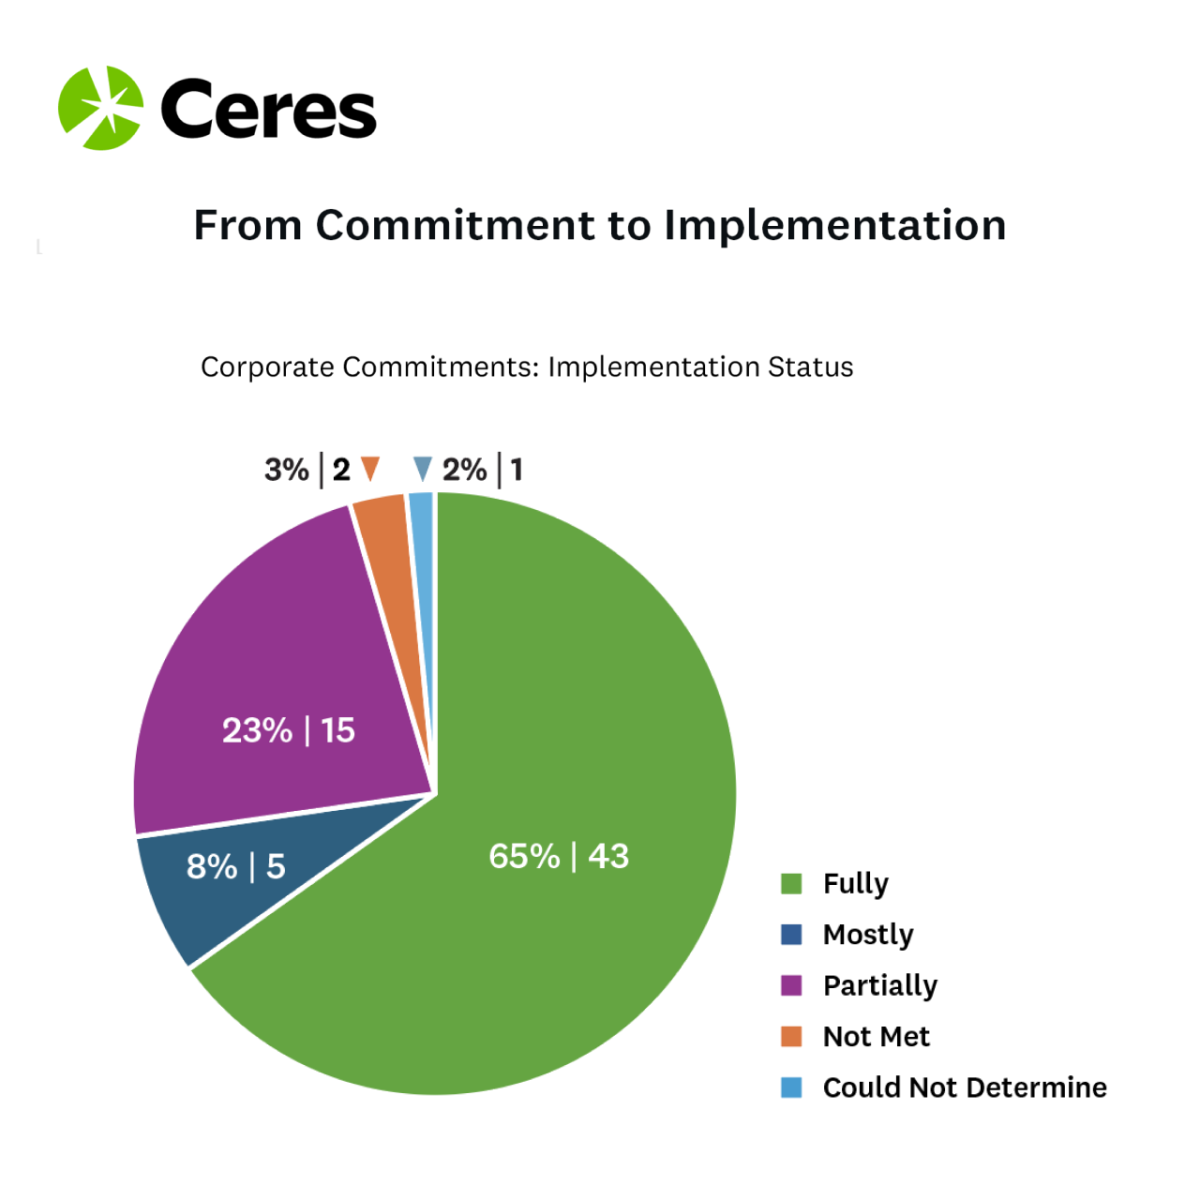 Corporate Commitments: Implementation Status